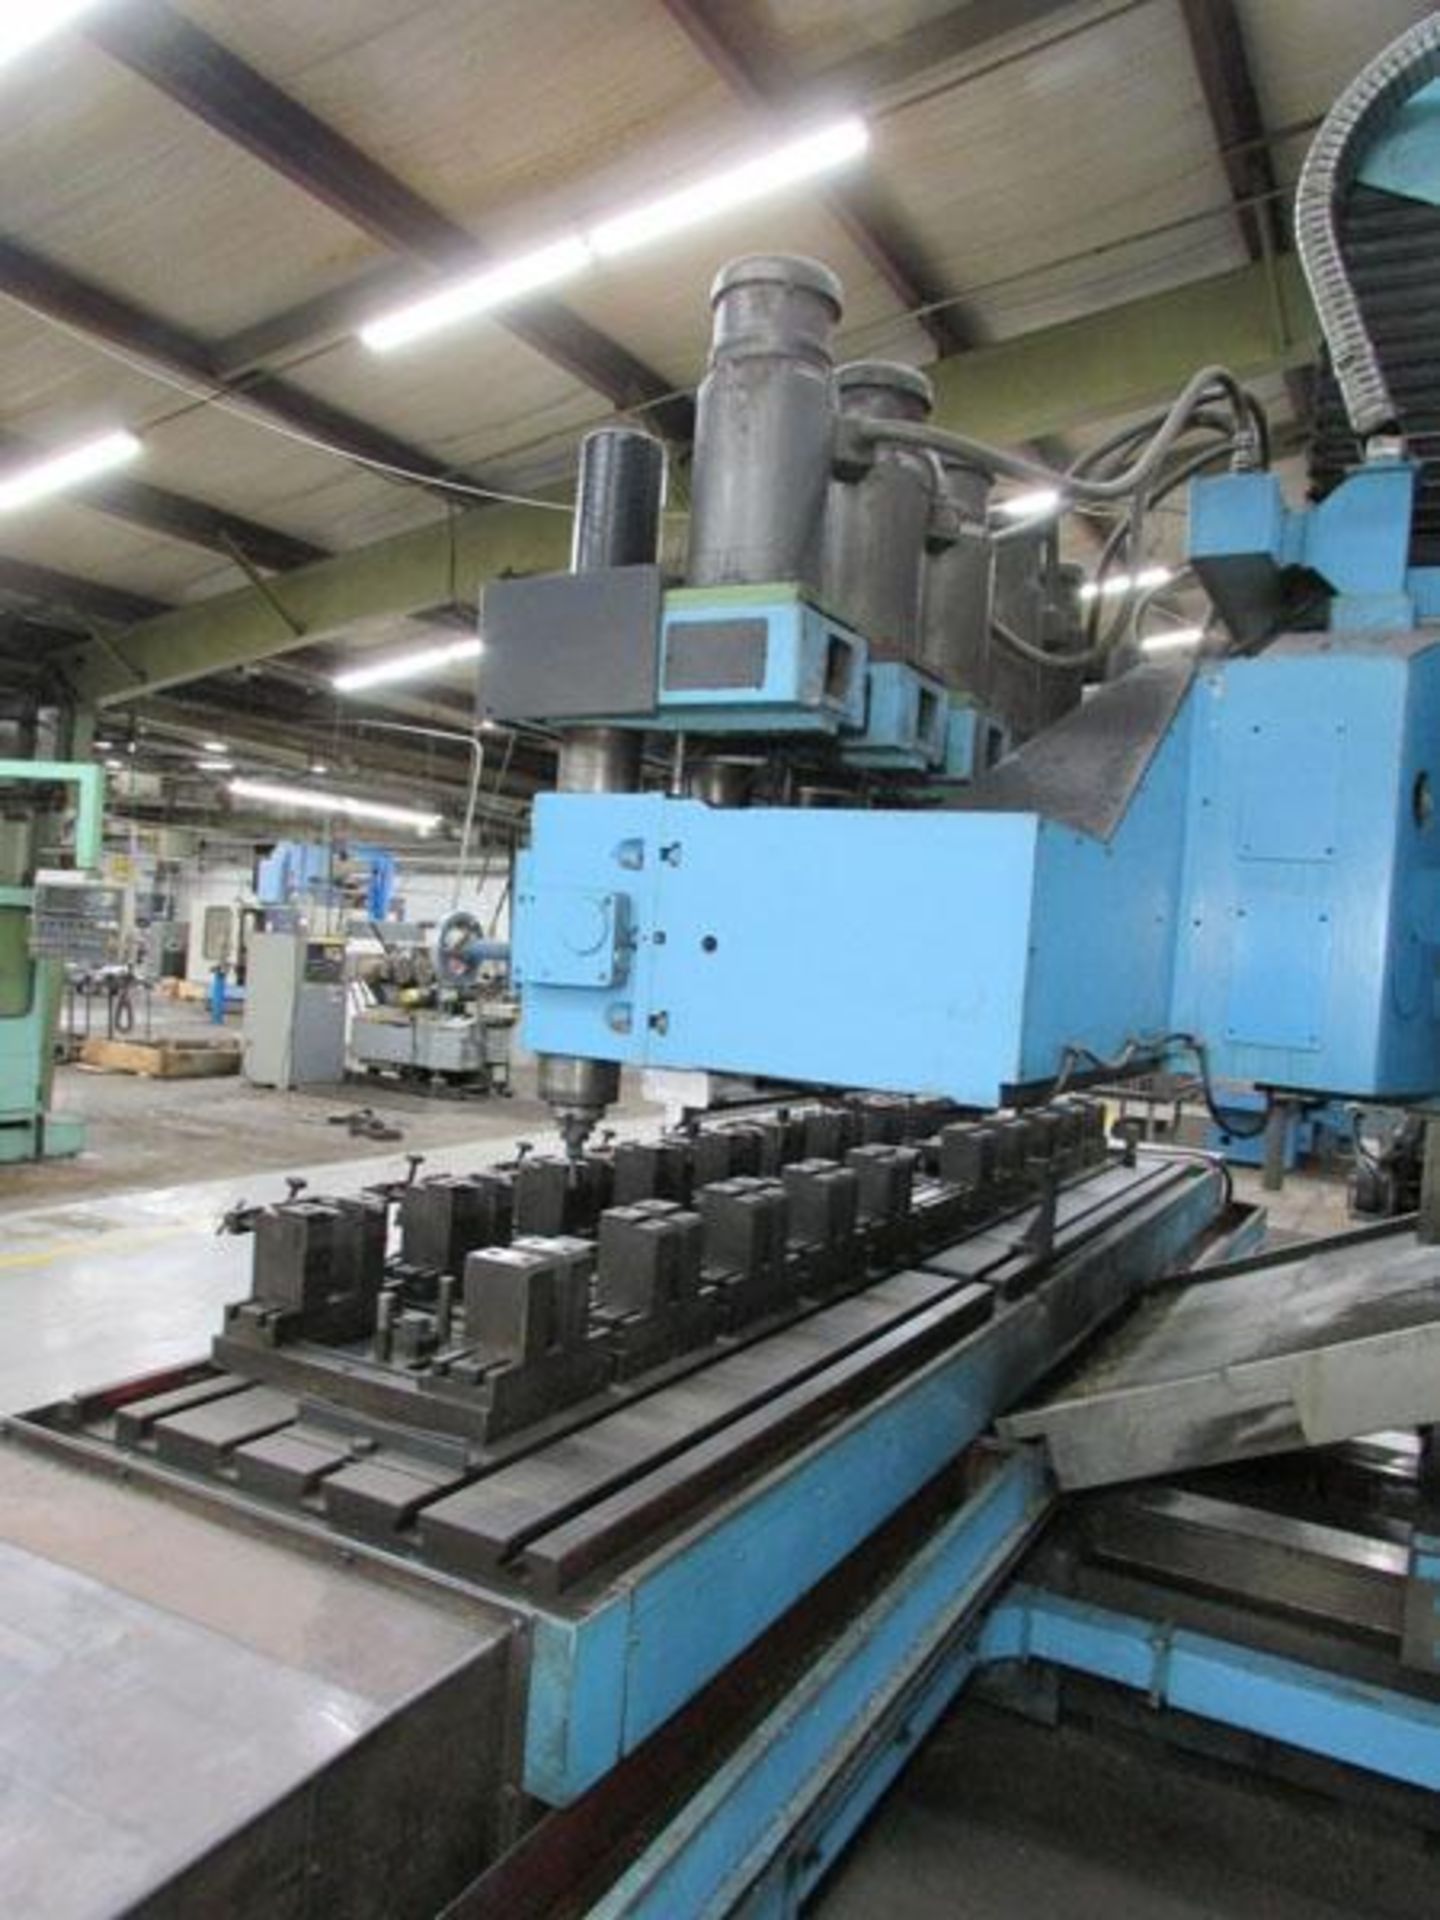 Seaberg MCP 1000 10 Spindle CNC Vertical Milling Machine - Image 13 of 21